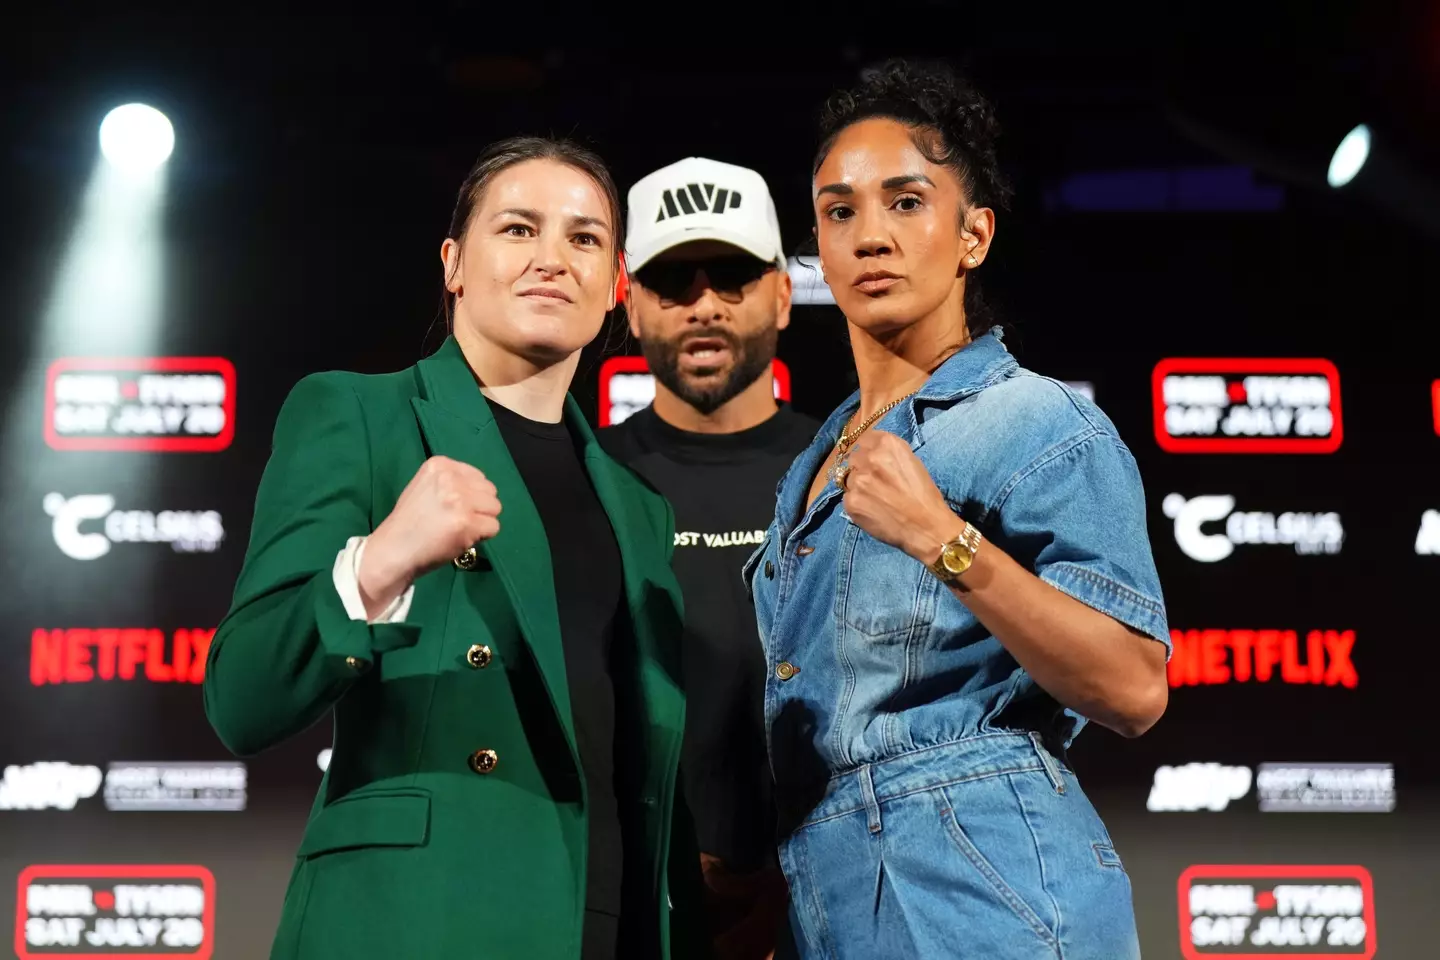 Katie Taylor vs. Amanda Serrano 2 won't be taking place in Germany. Image: Getty